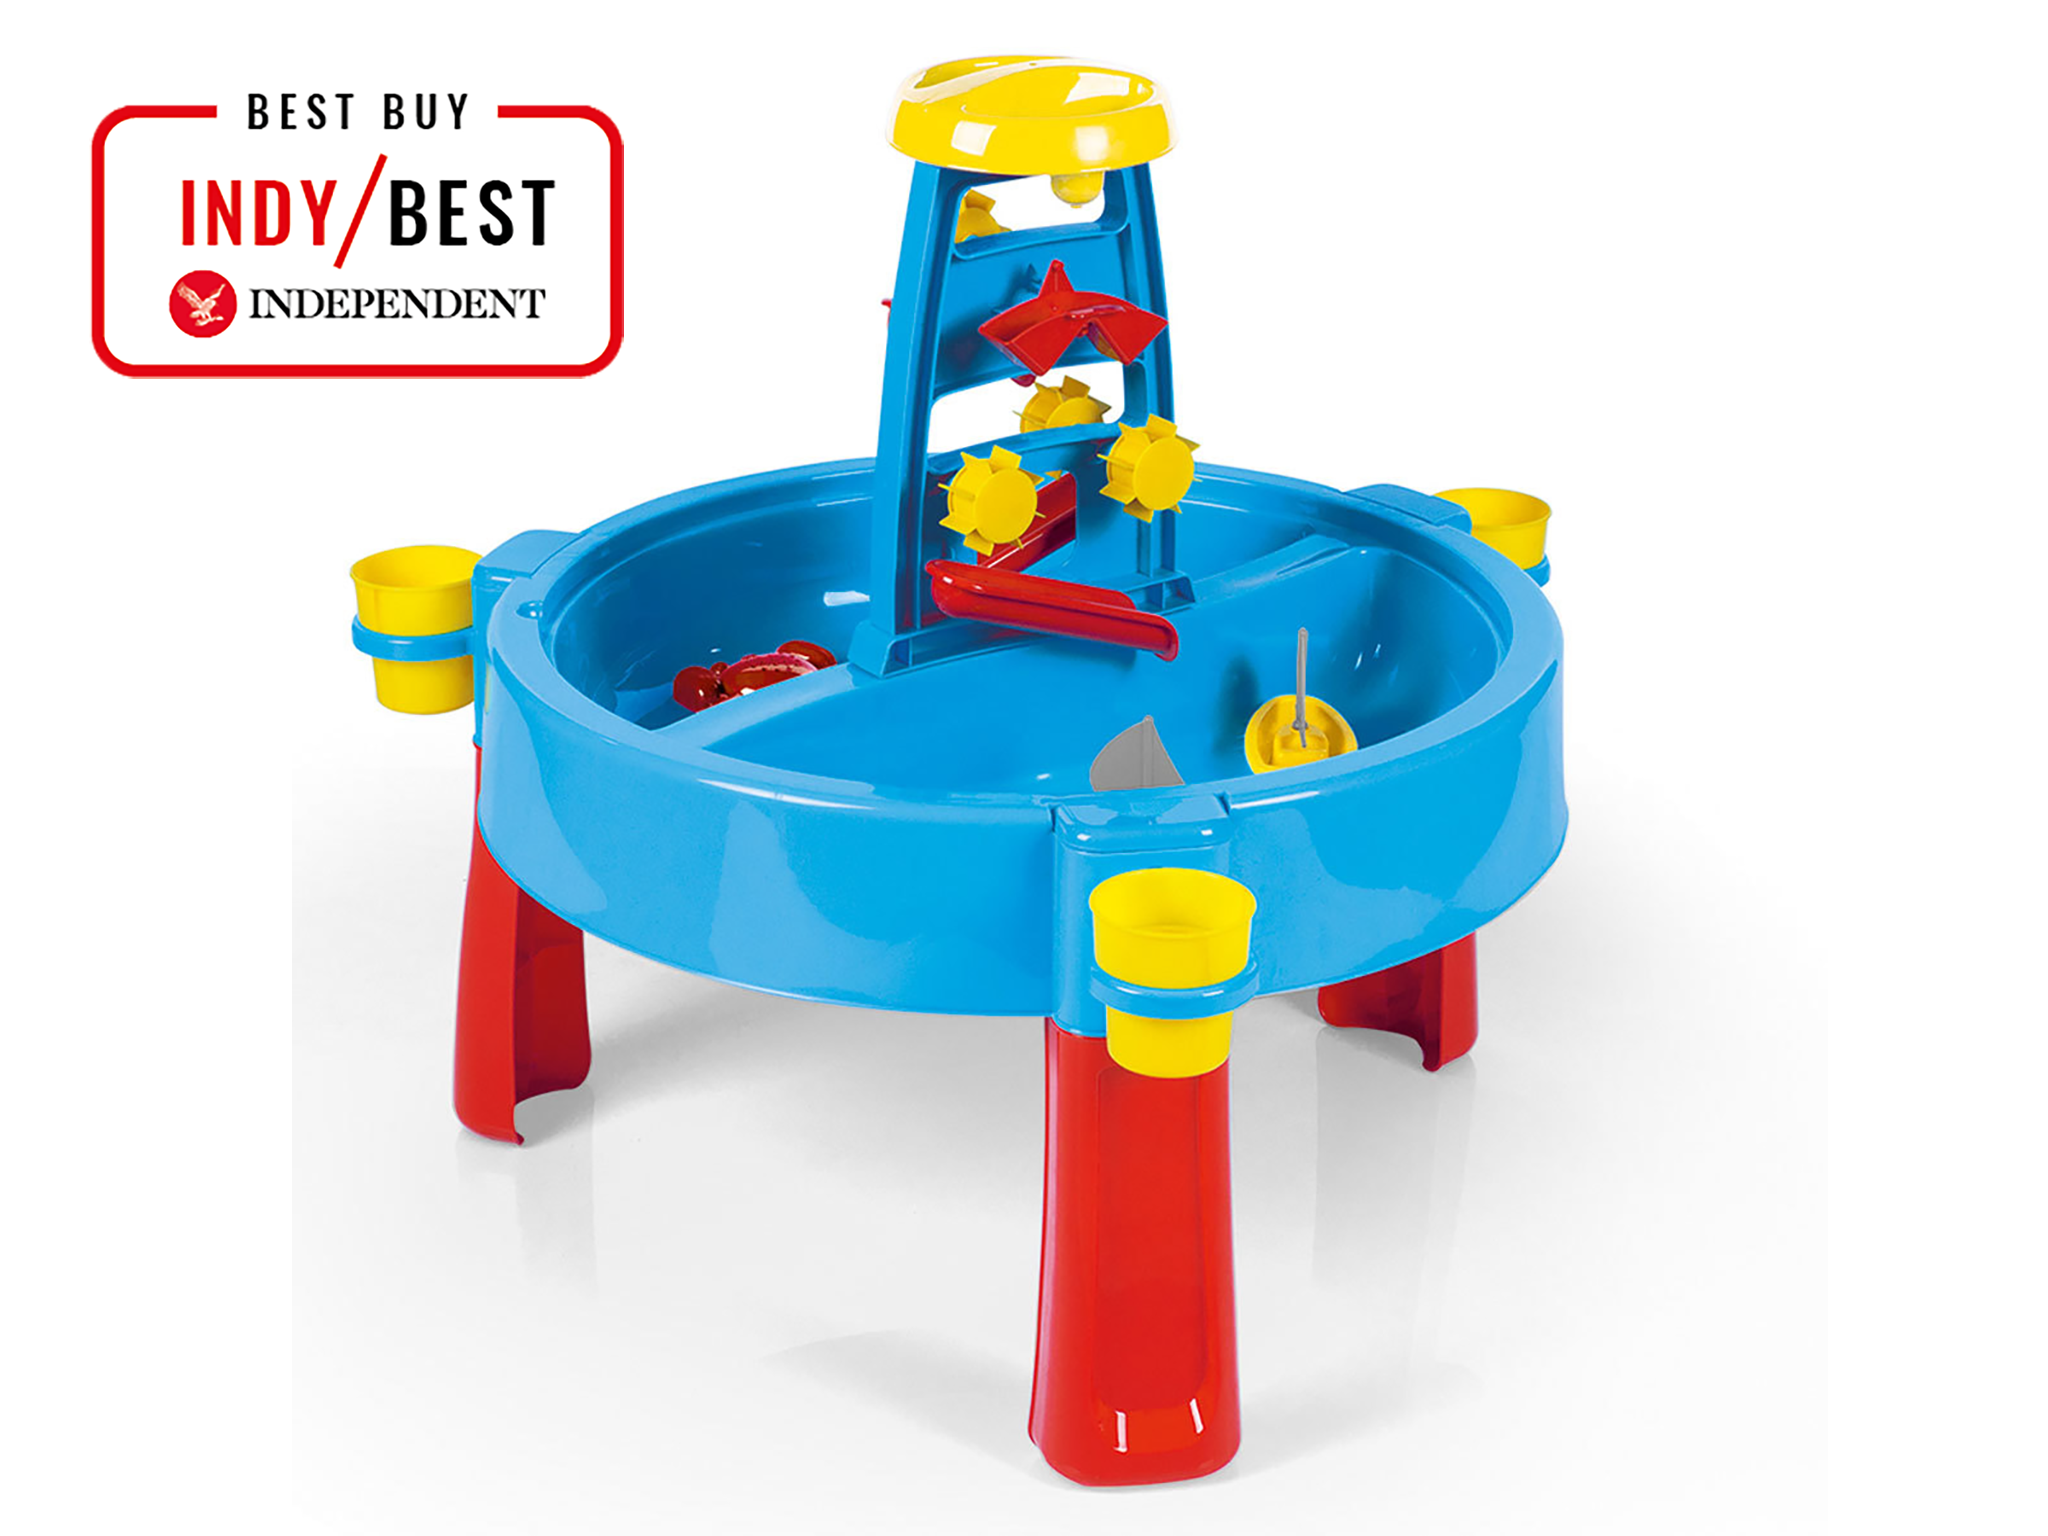 3-in-1 activity, sand and water table with lid